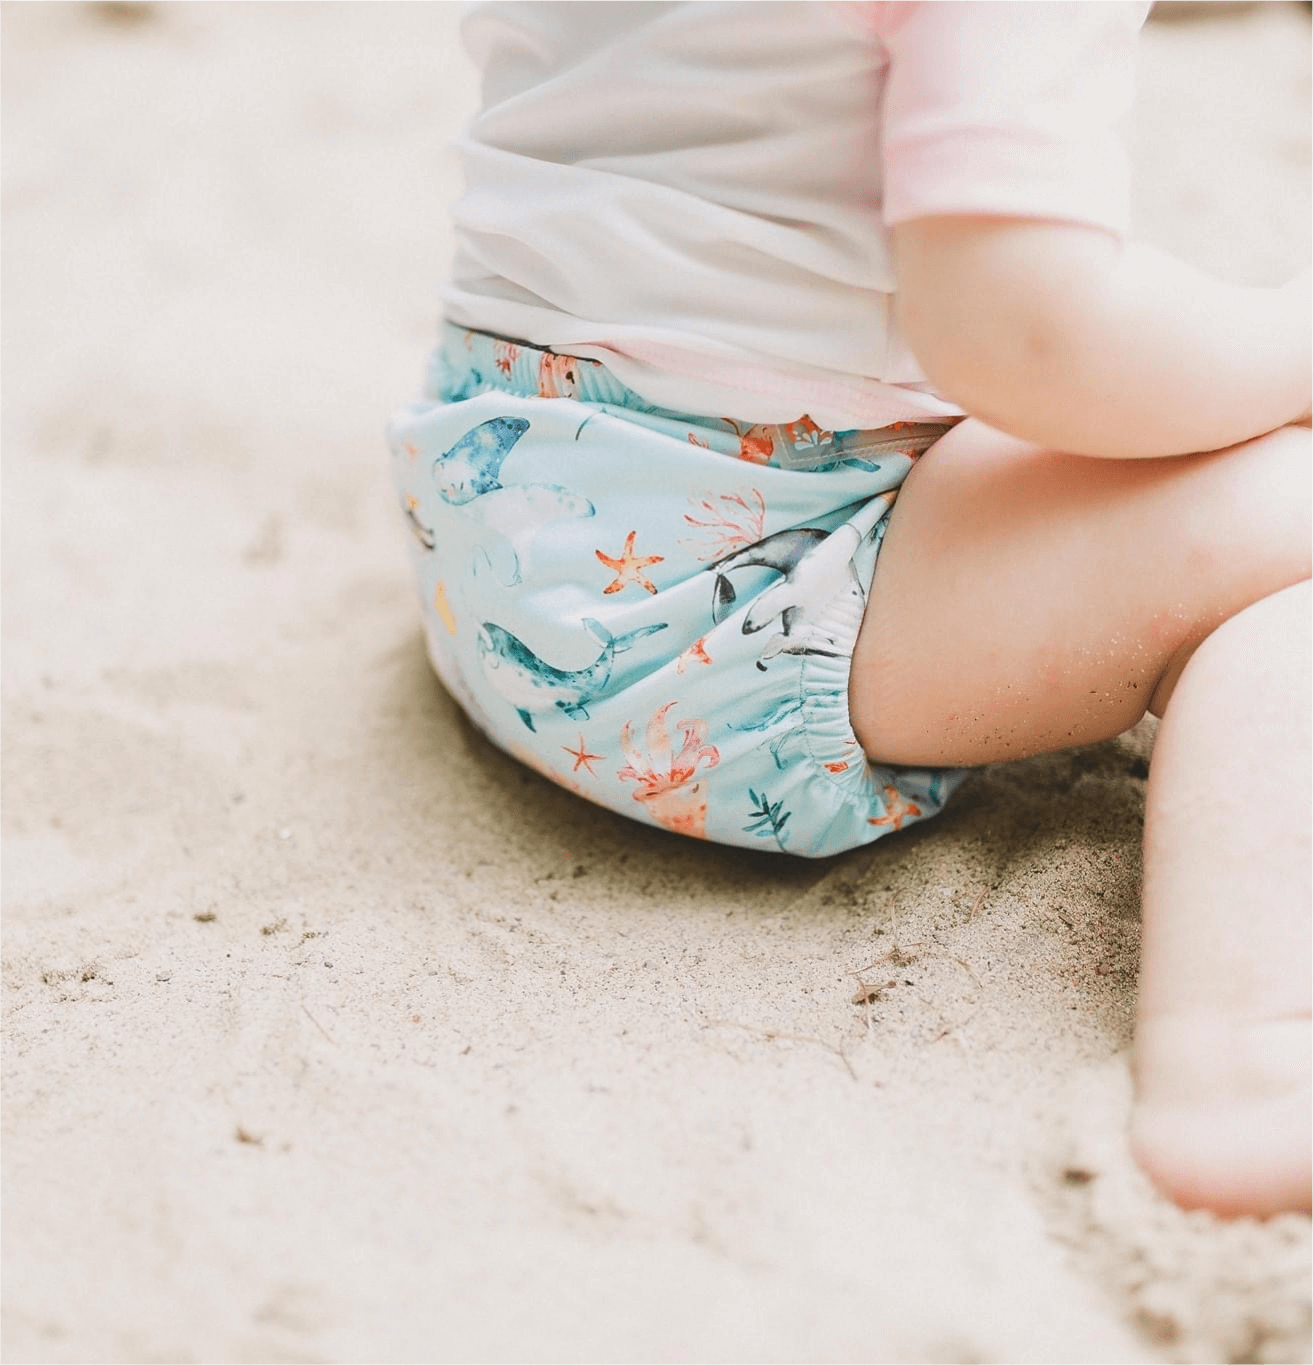 reusable swim diapers for little swimmers are super easy to be worn by a child or baby of any age